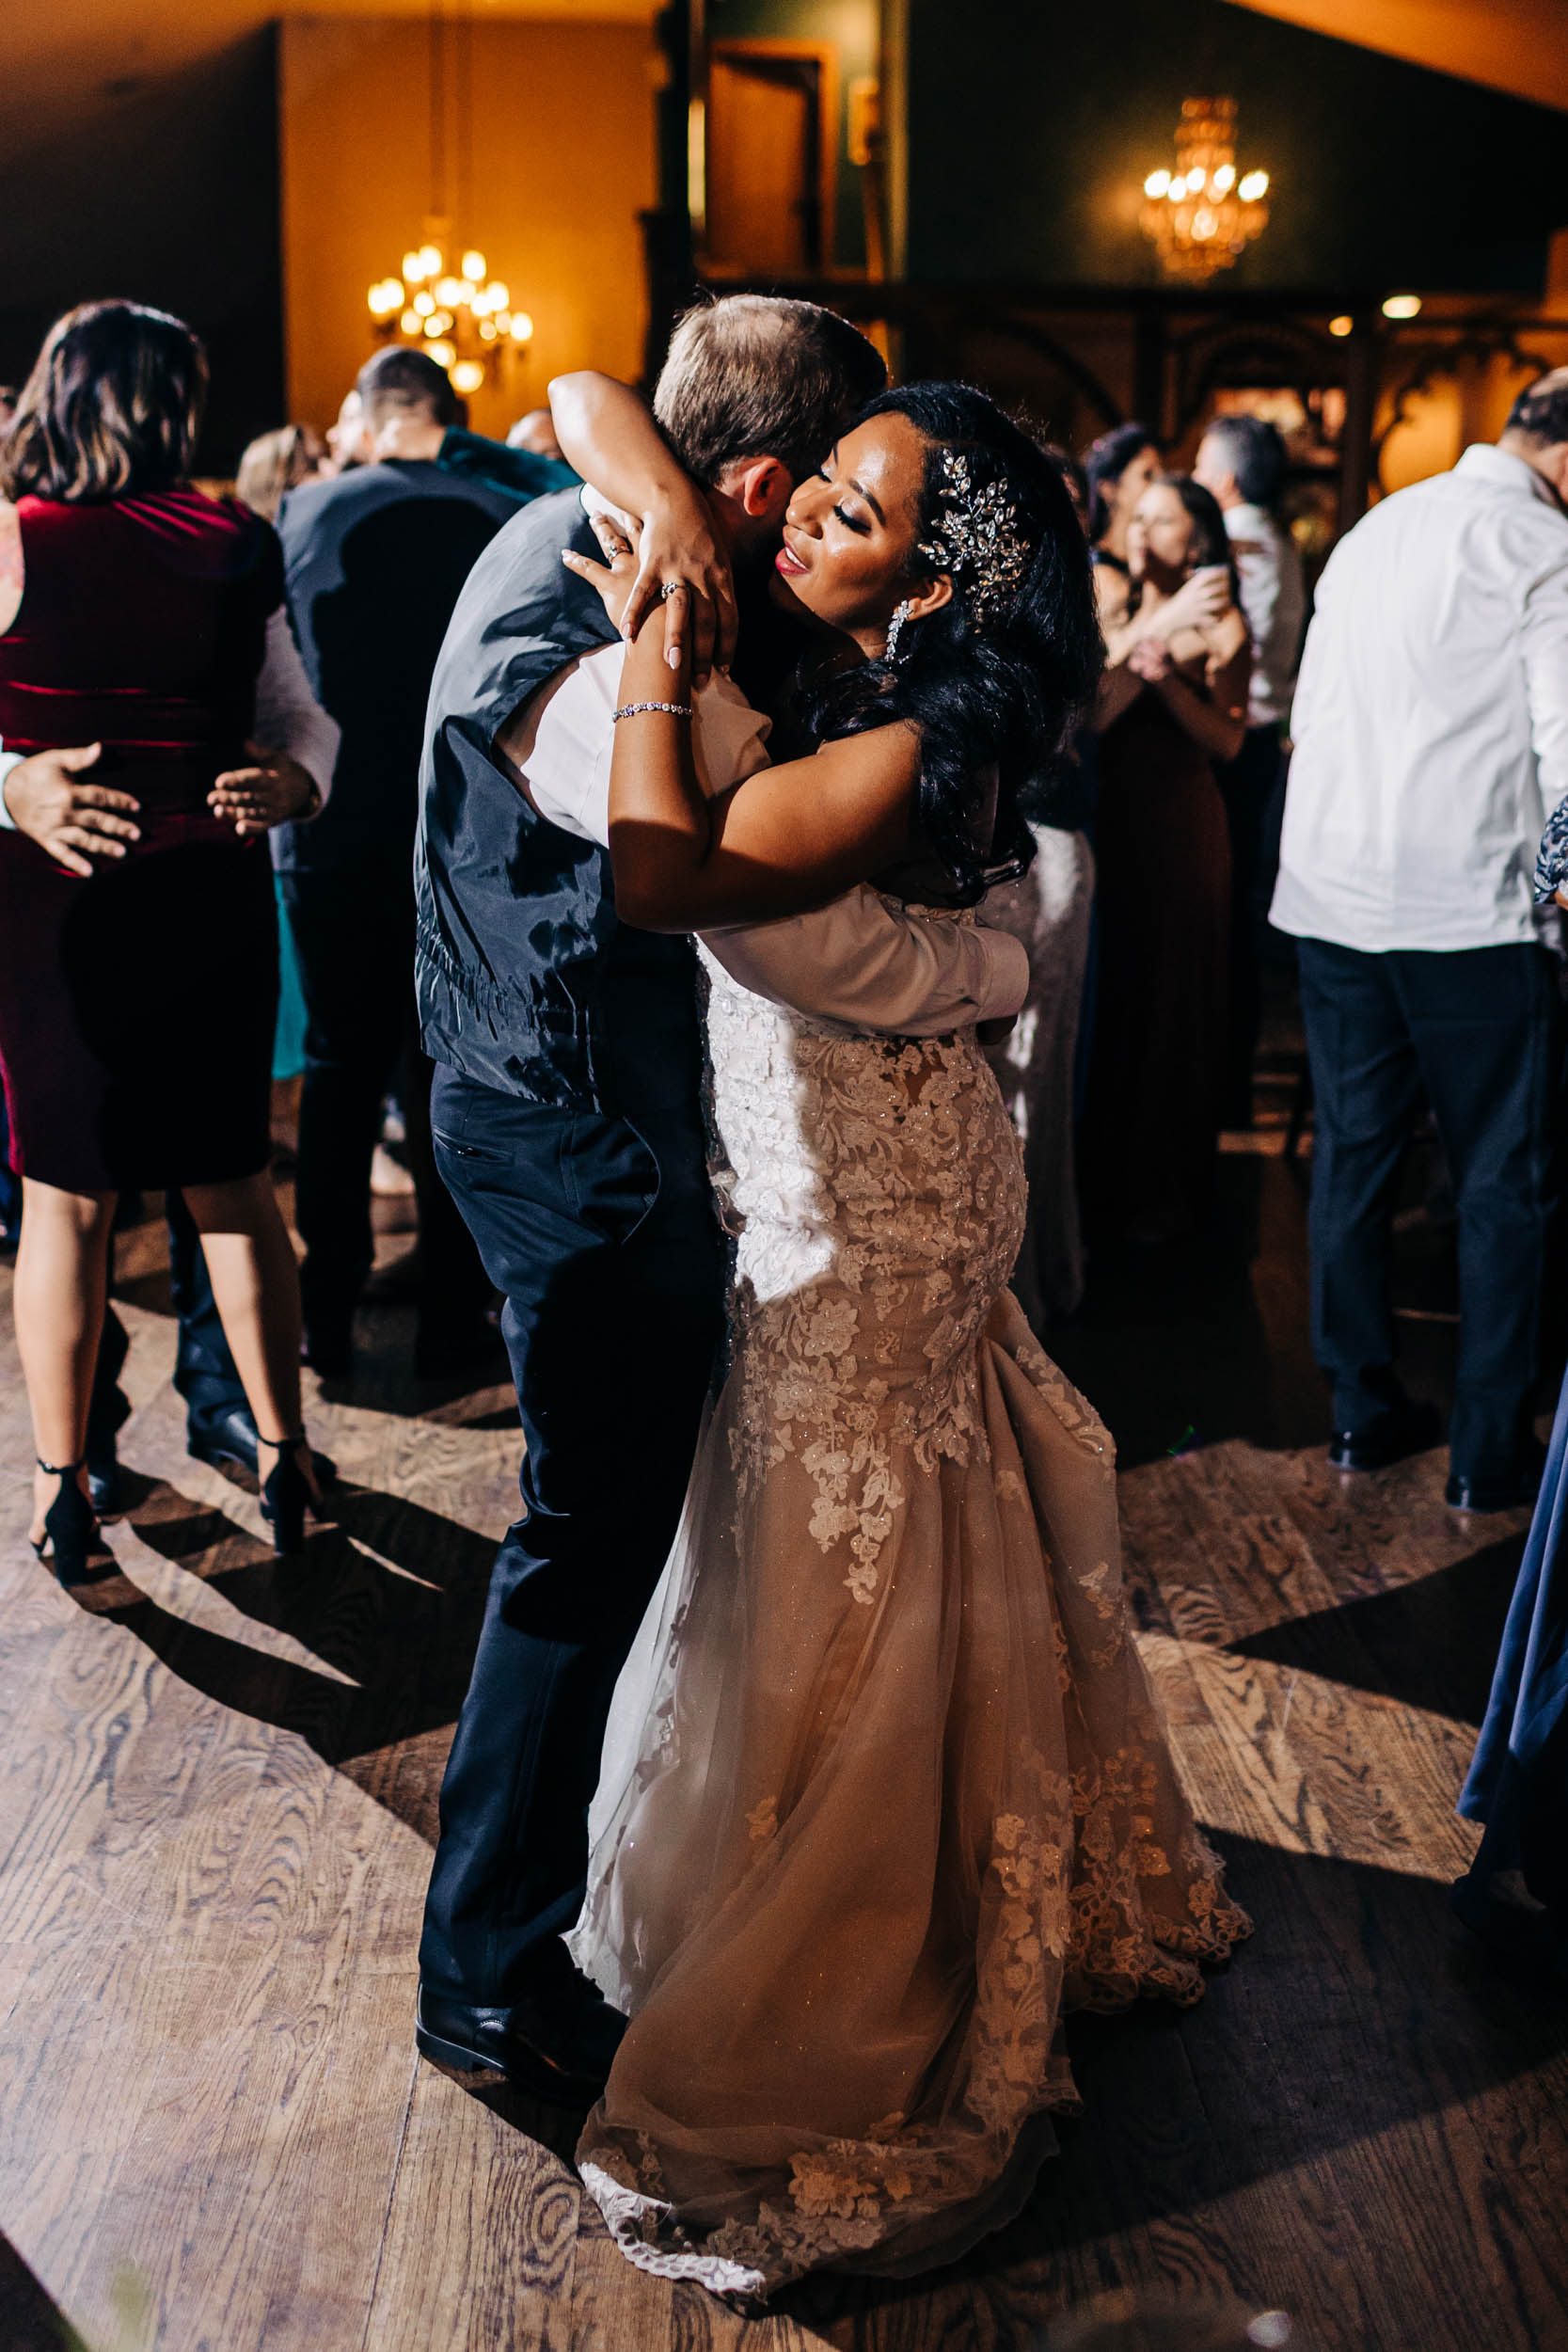 couple dancing at wedding reception at lionsgate event center